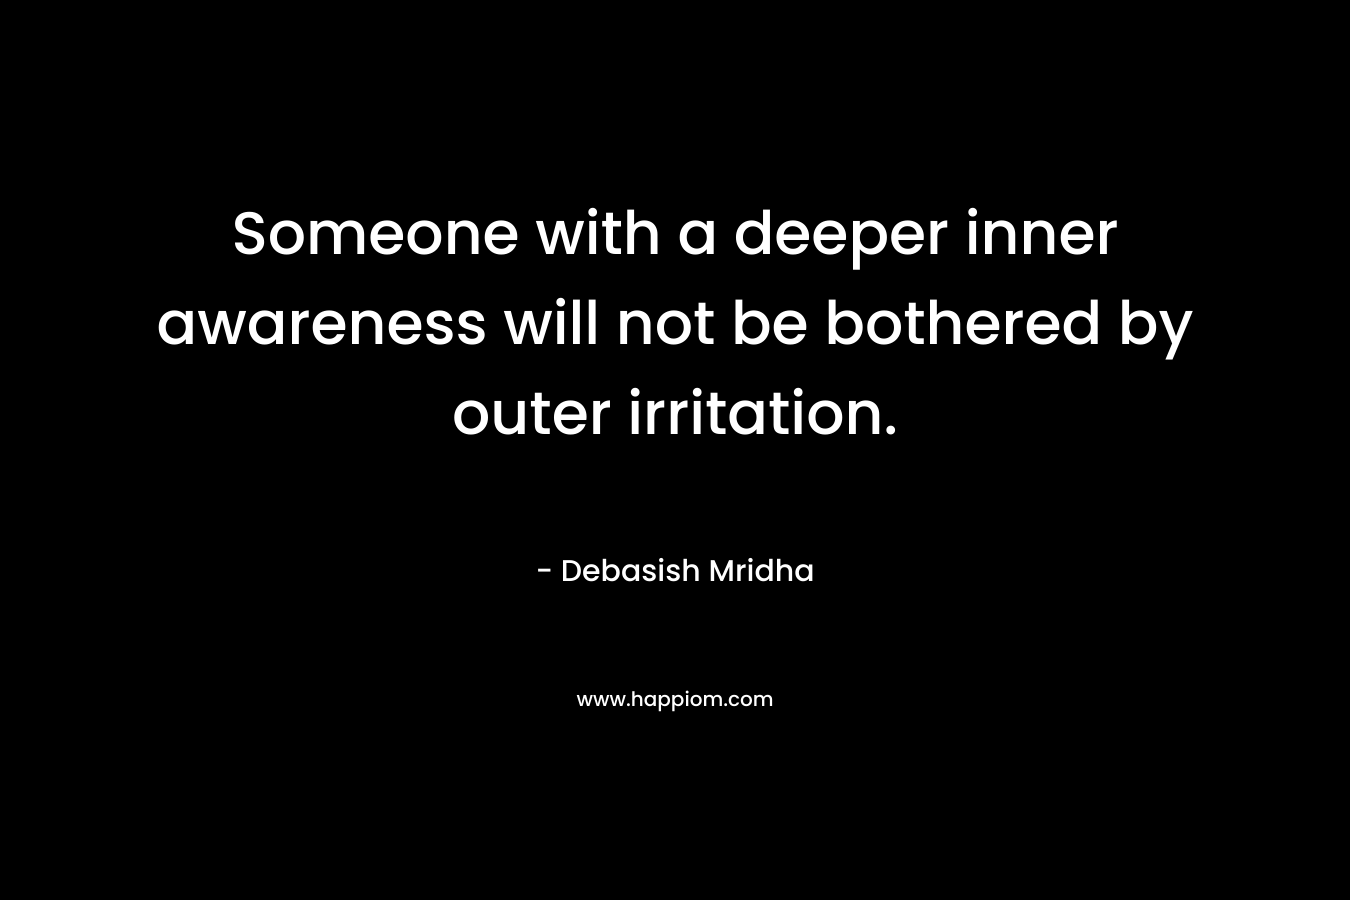 Someone with a deeper inner awareness will not be bothered by outer irritation. – Debasish Mridha